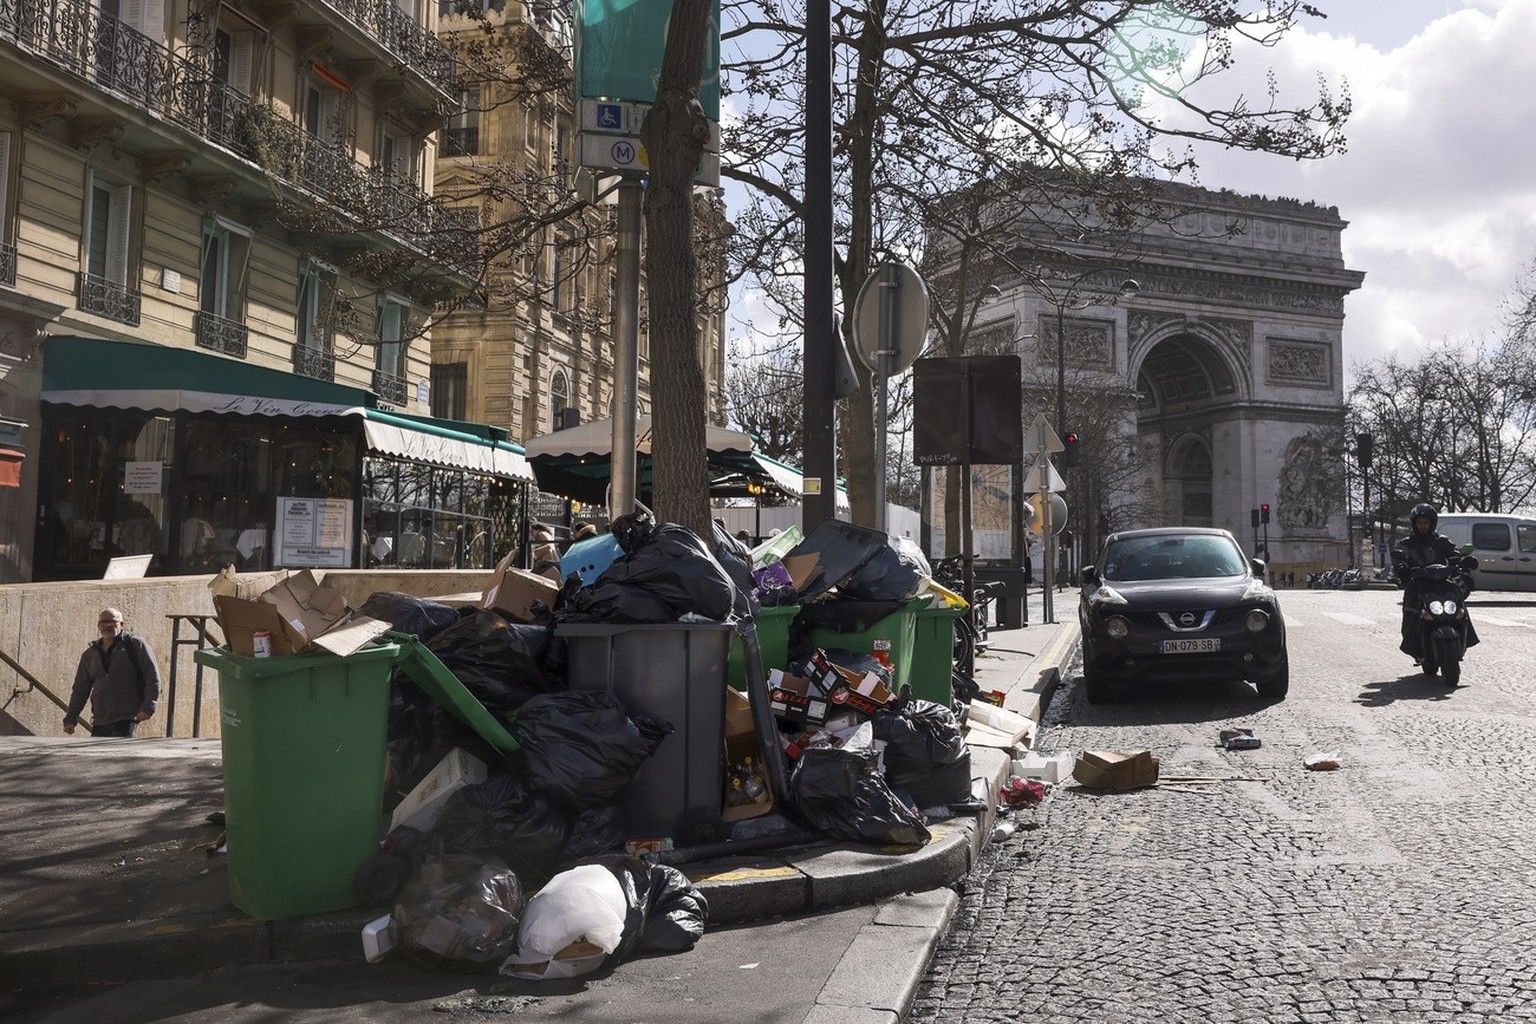 Uncollected garbages are pictured near the Arc de Triomphe in Paris, Tuesday, March 14, 2023. The City of Light is losing its luster with tons of garbage piling up on Paris sidewalks as sanitation wor ...